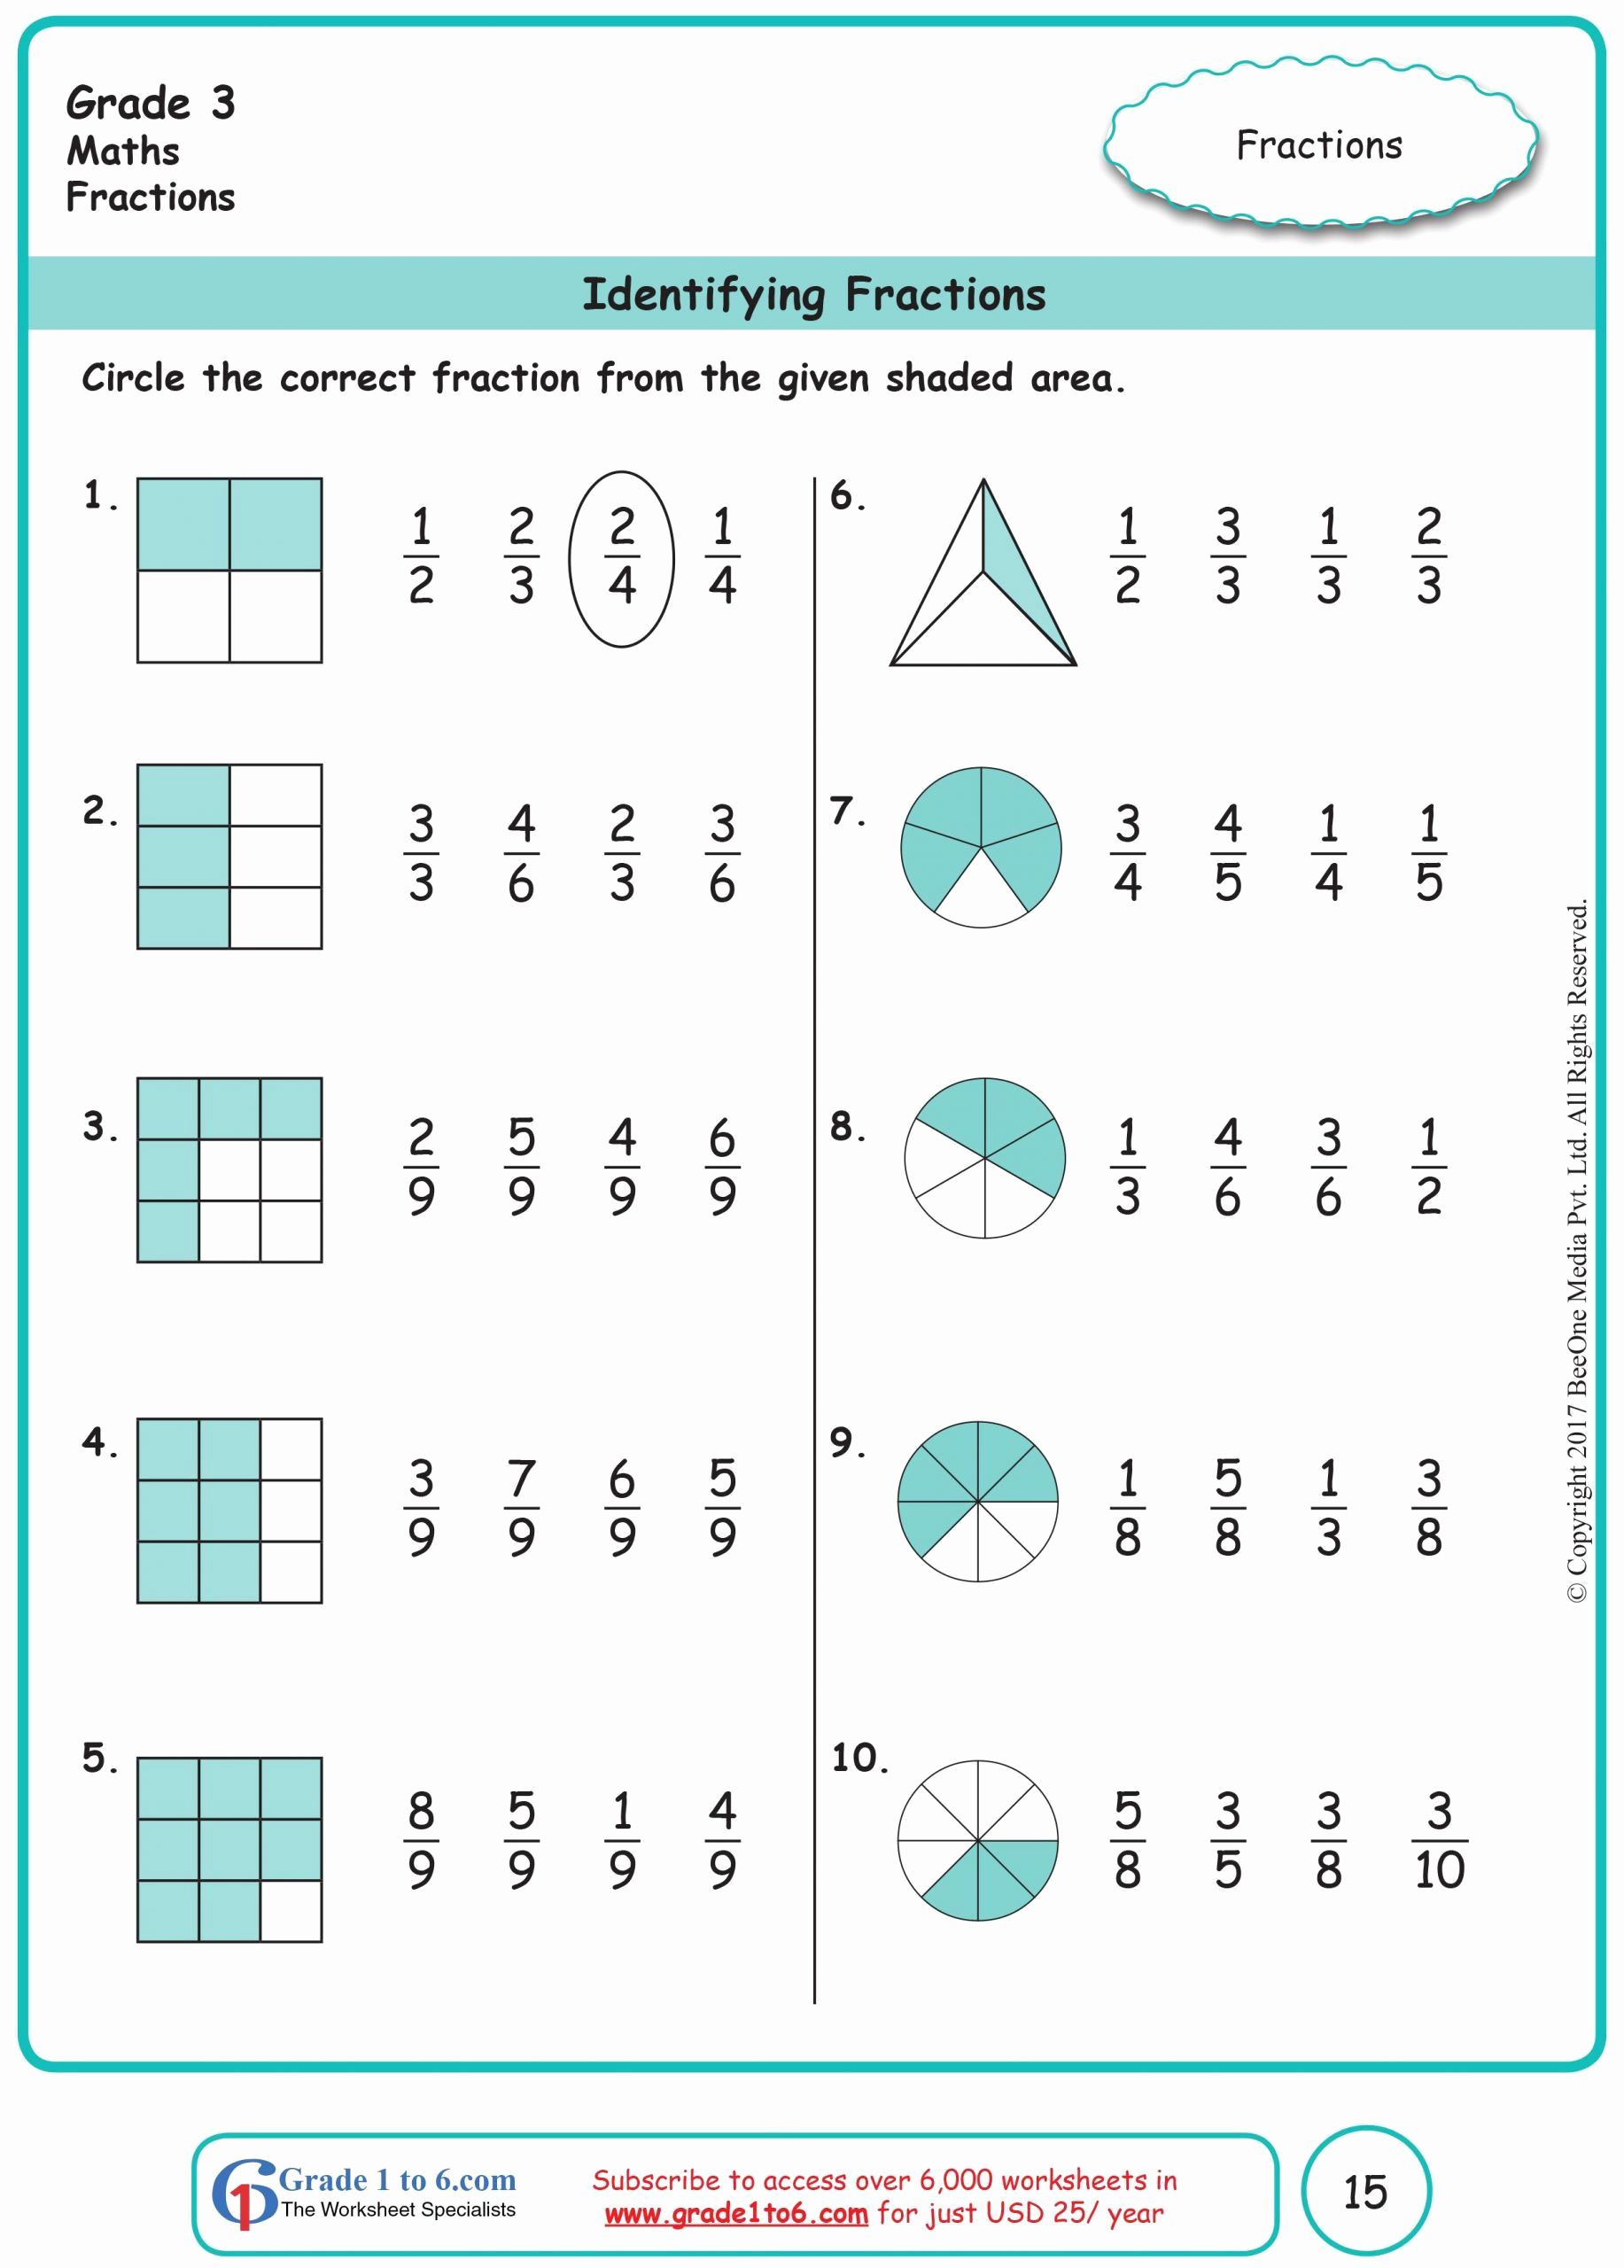 Fractions Worksheets 2nd Grade Beautiful 2nd Grade Fractions Worksheet